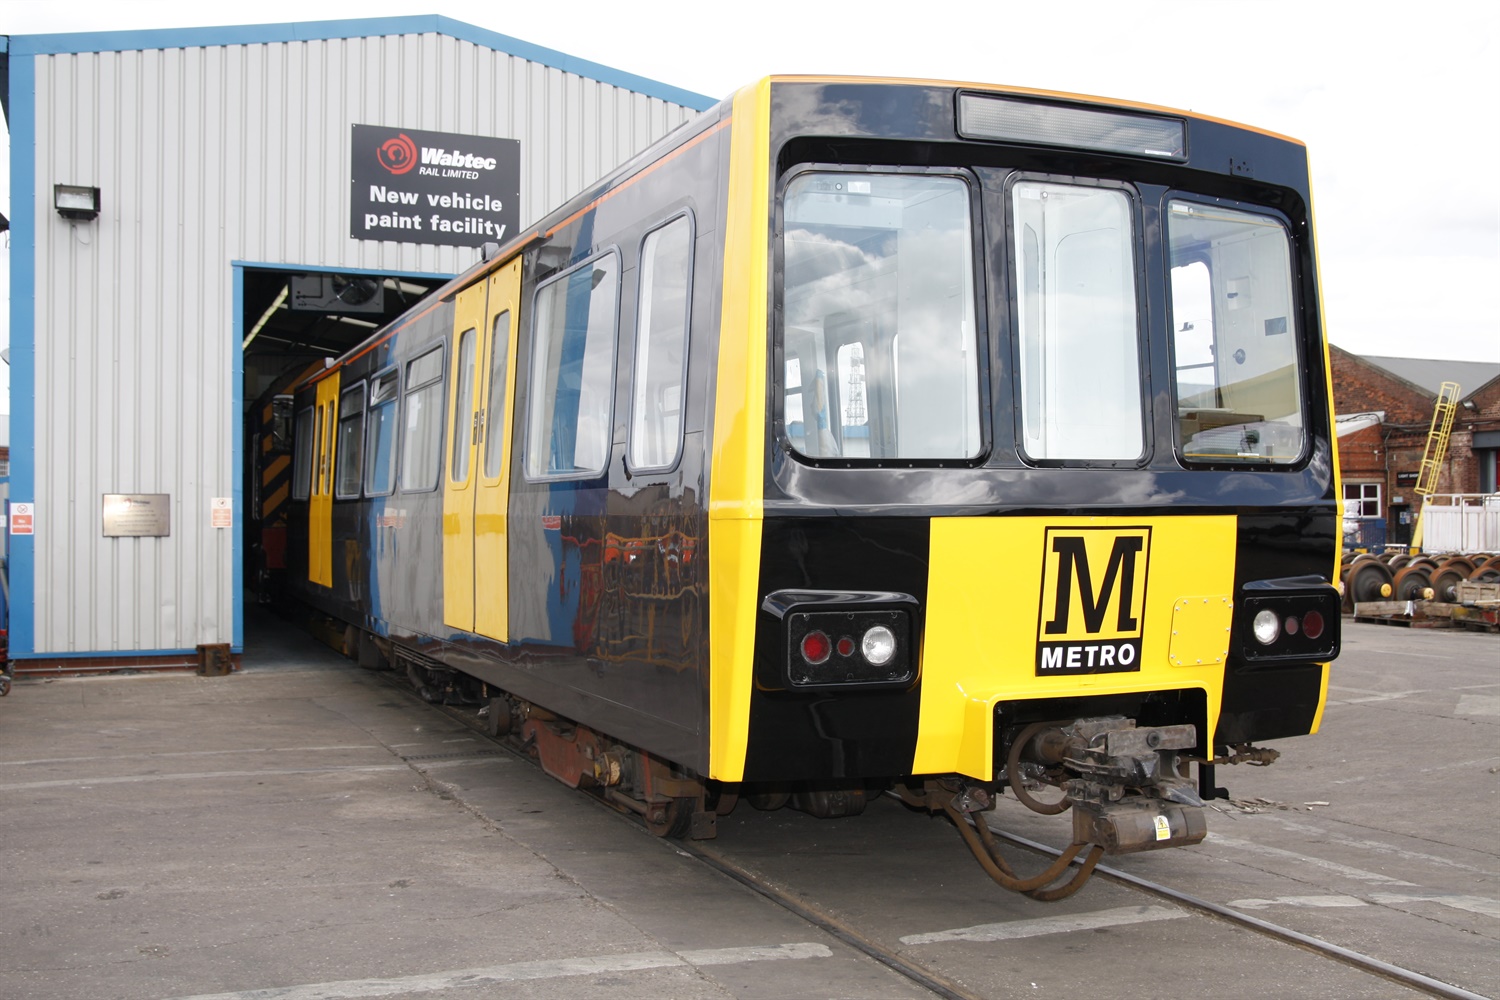 Government cuts Tyne and Wear Metro modernisation funding by £33m